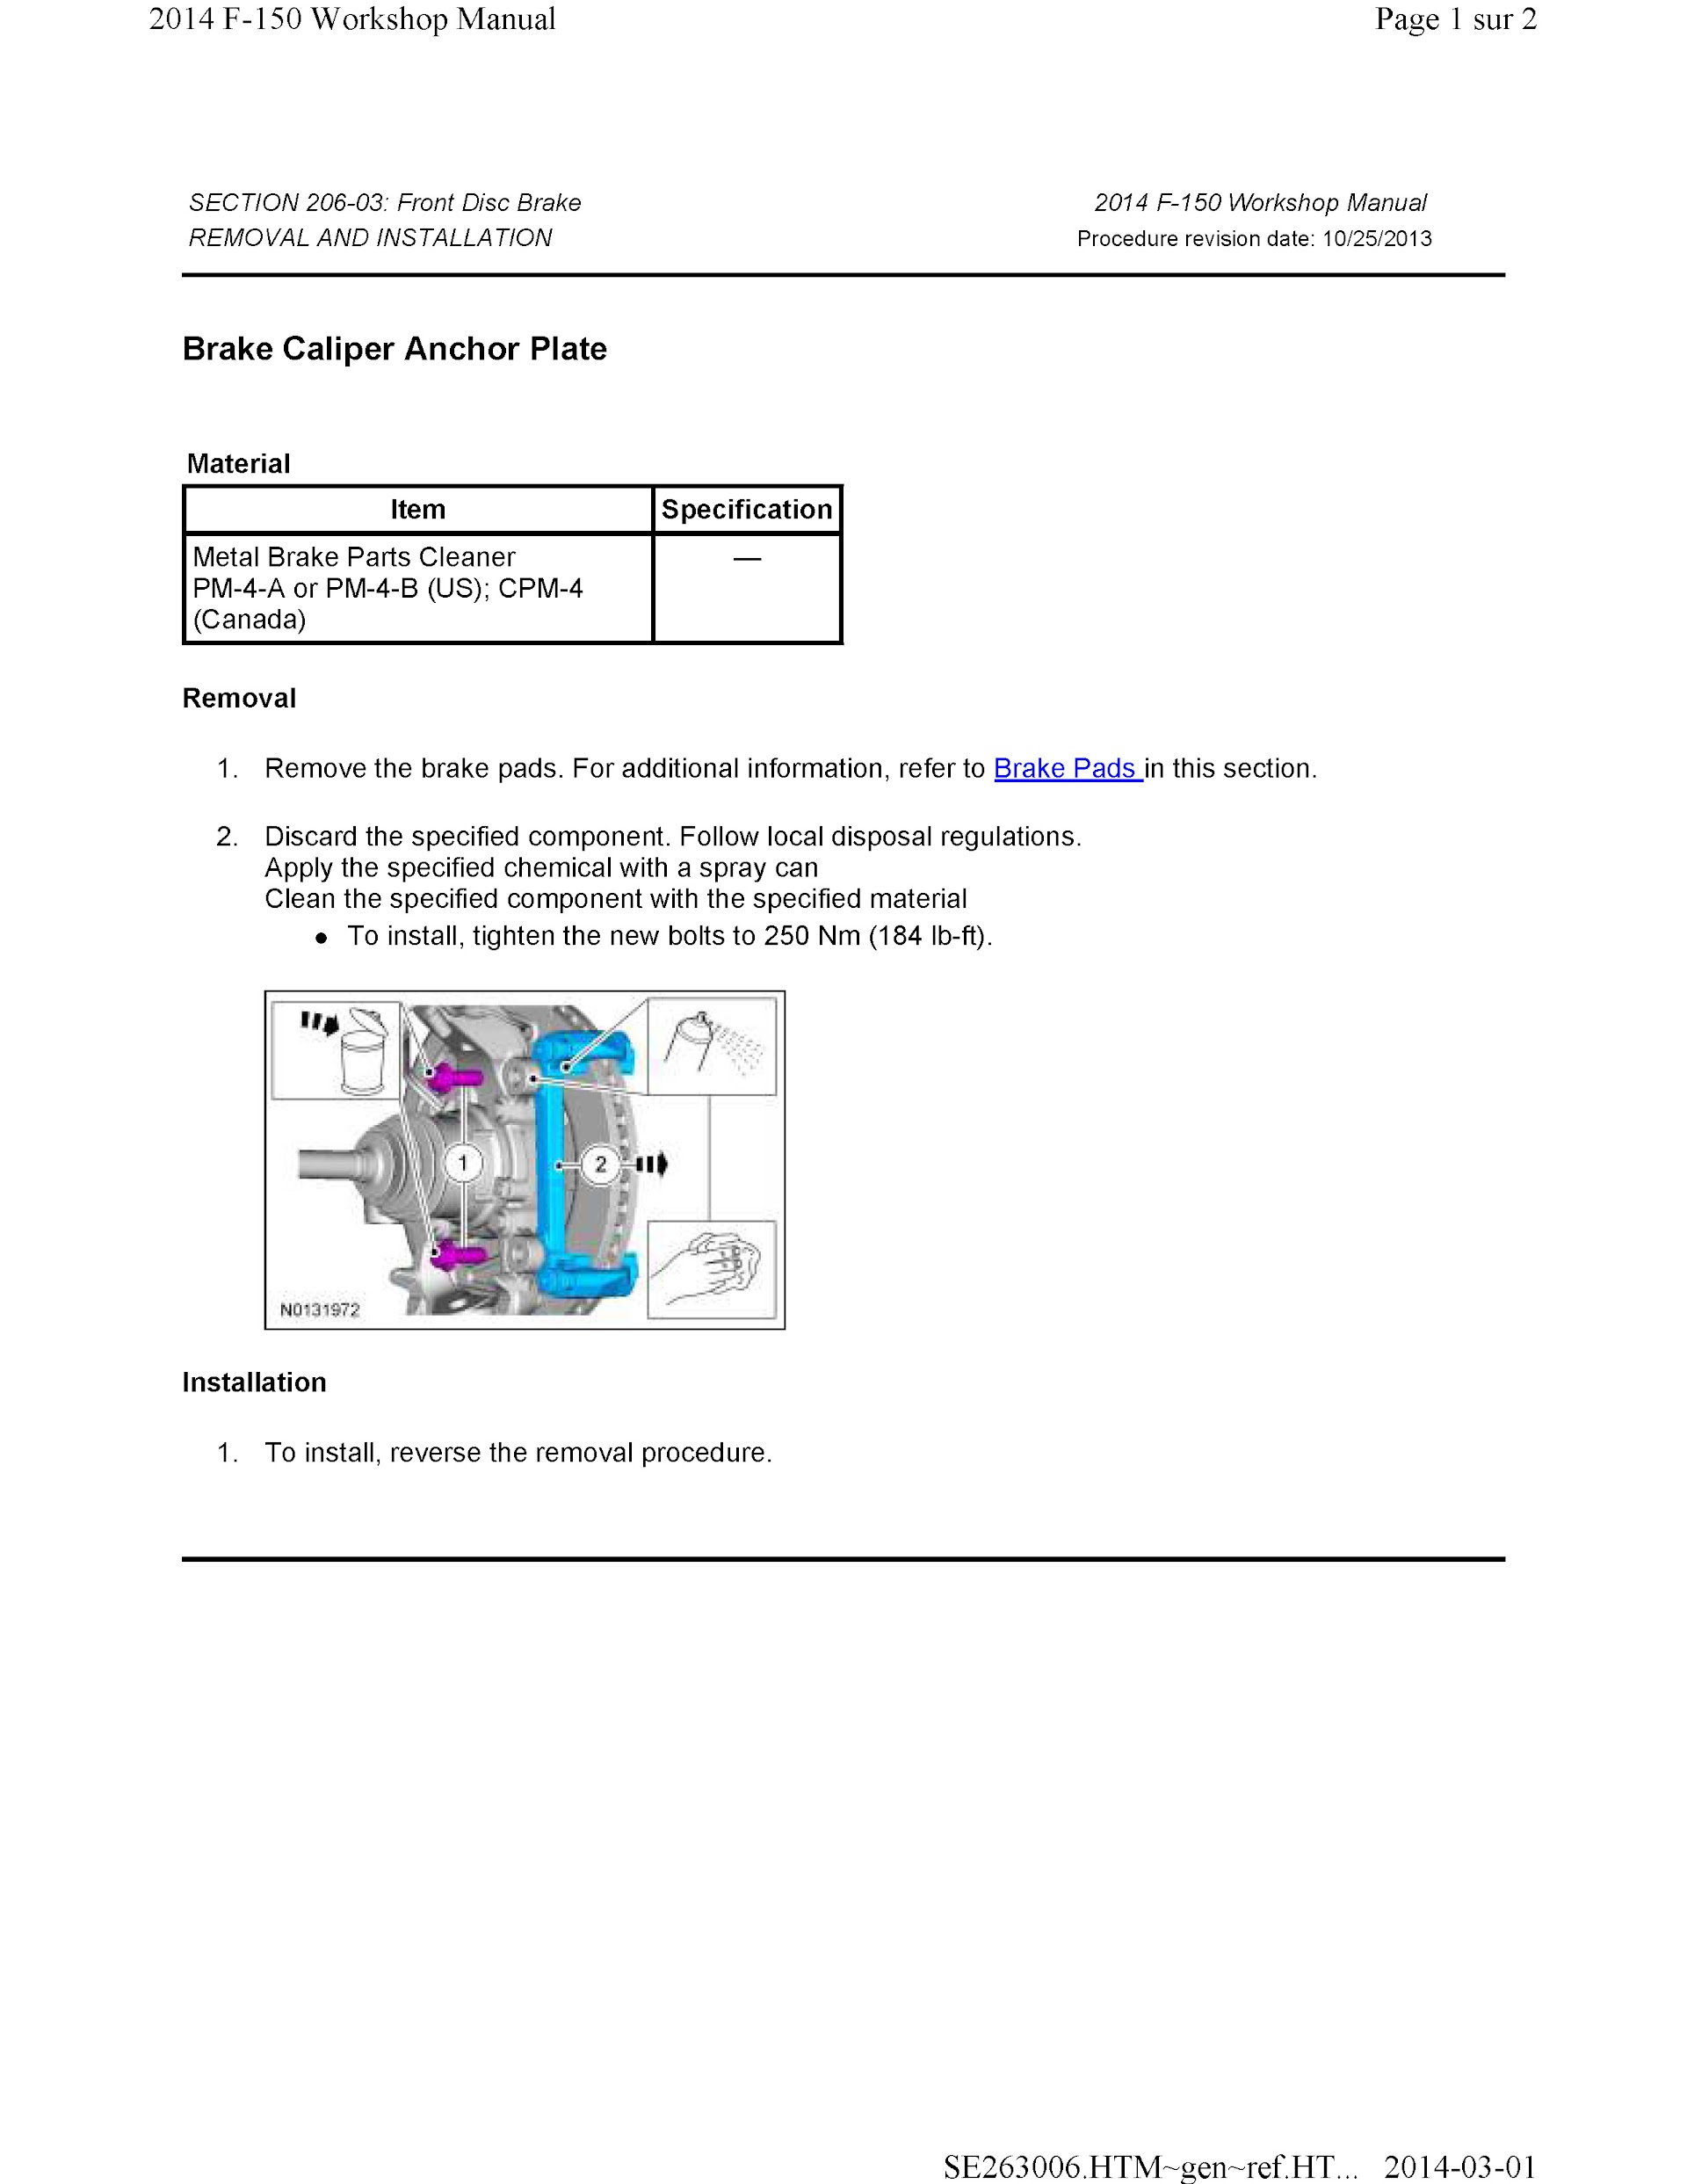 2011-2014 Ford F-150 Repair Manual, Front Disc Brake Removal and Installation